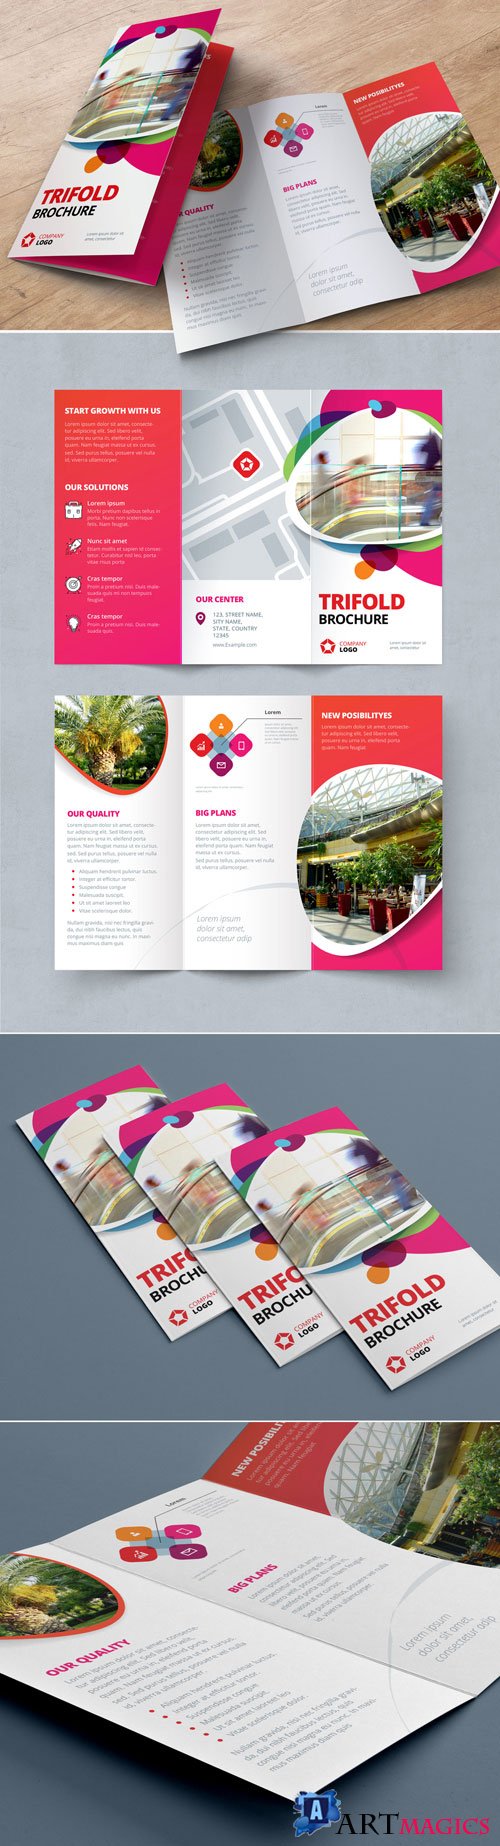 Pink and Red Gradient Trifold Brochure Layout with Abstract Spots 212820437